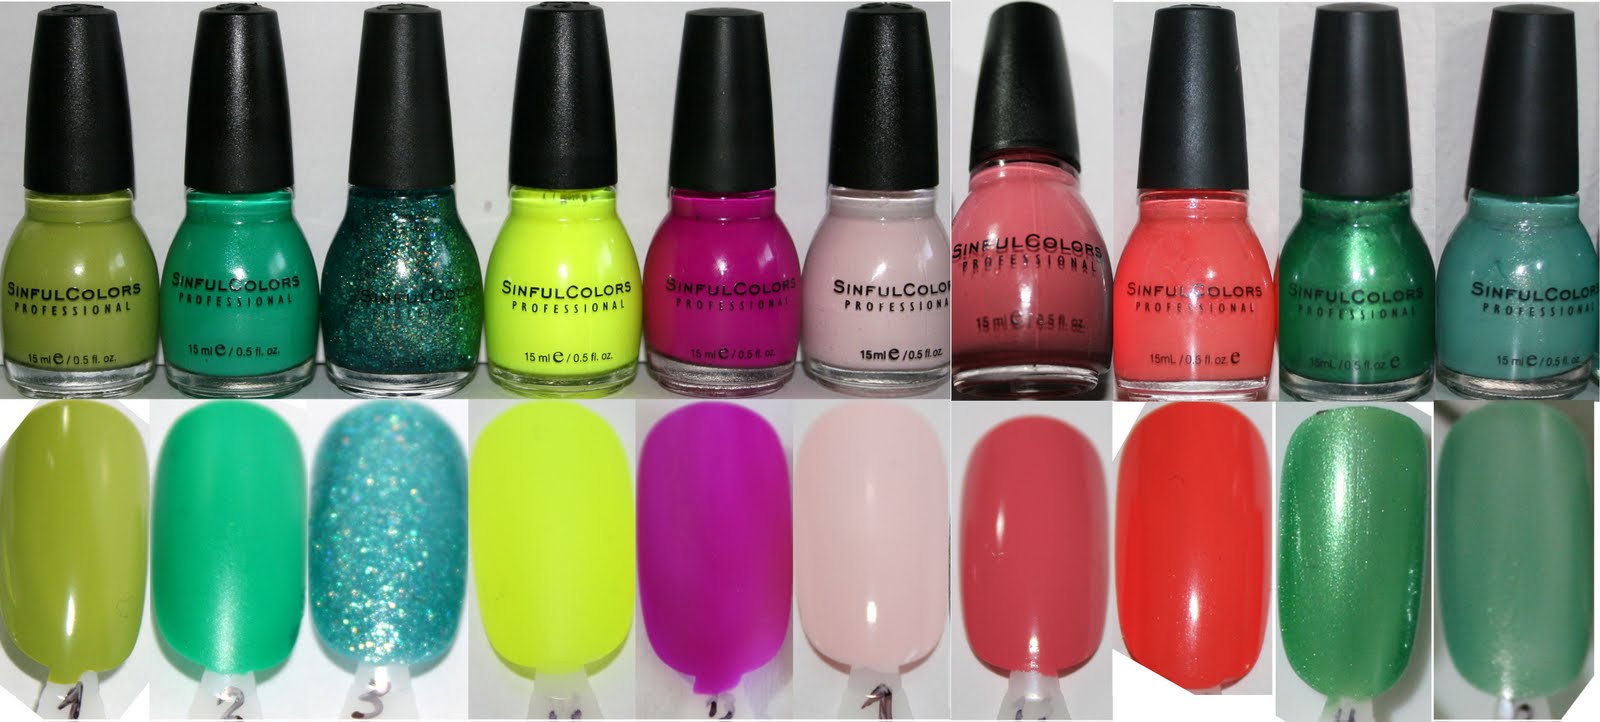 10. Sinful Colors Street Legal Nail Polish Collection - wide 7